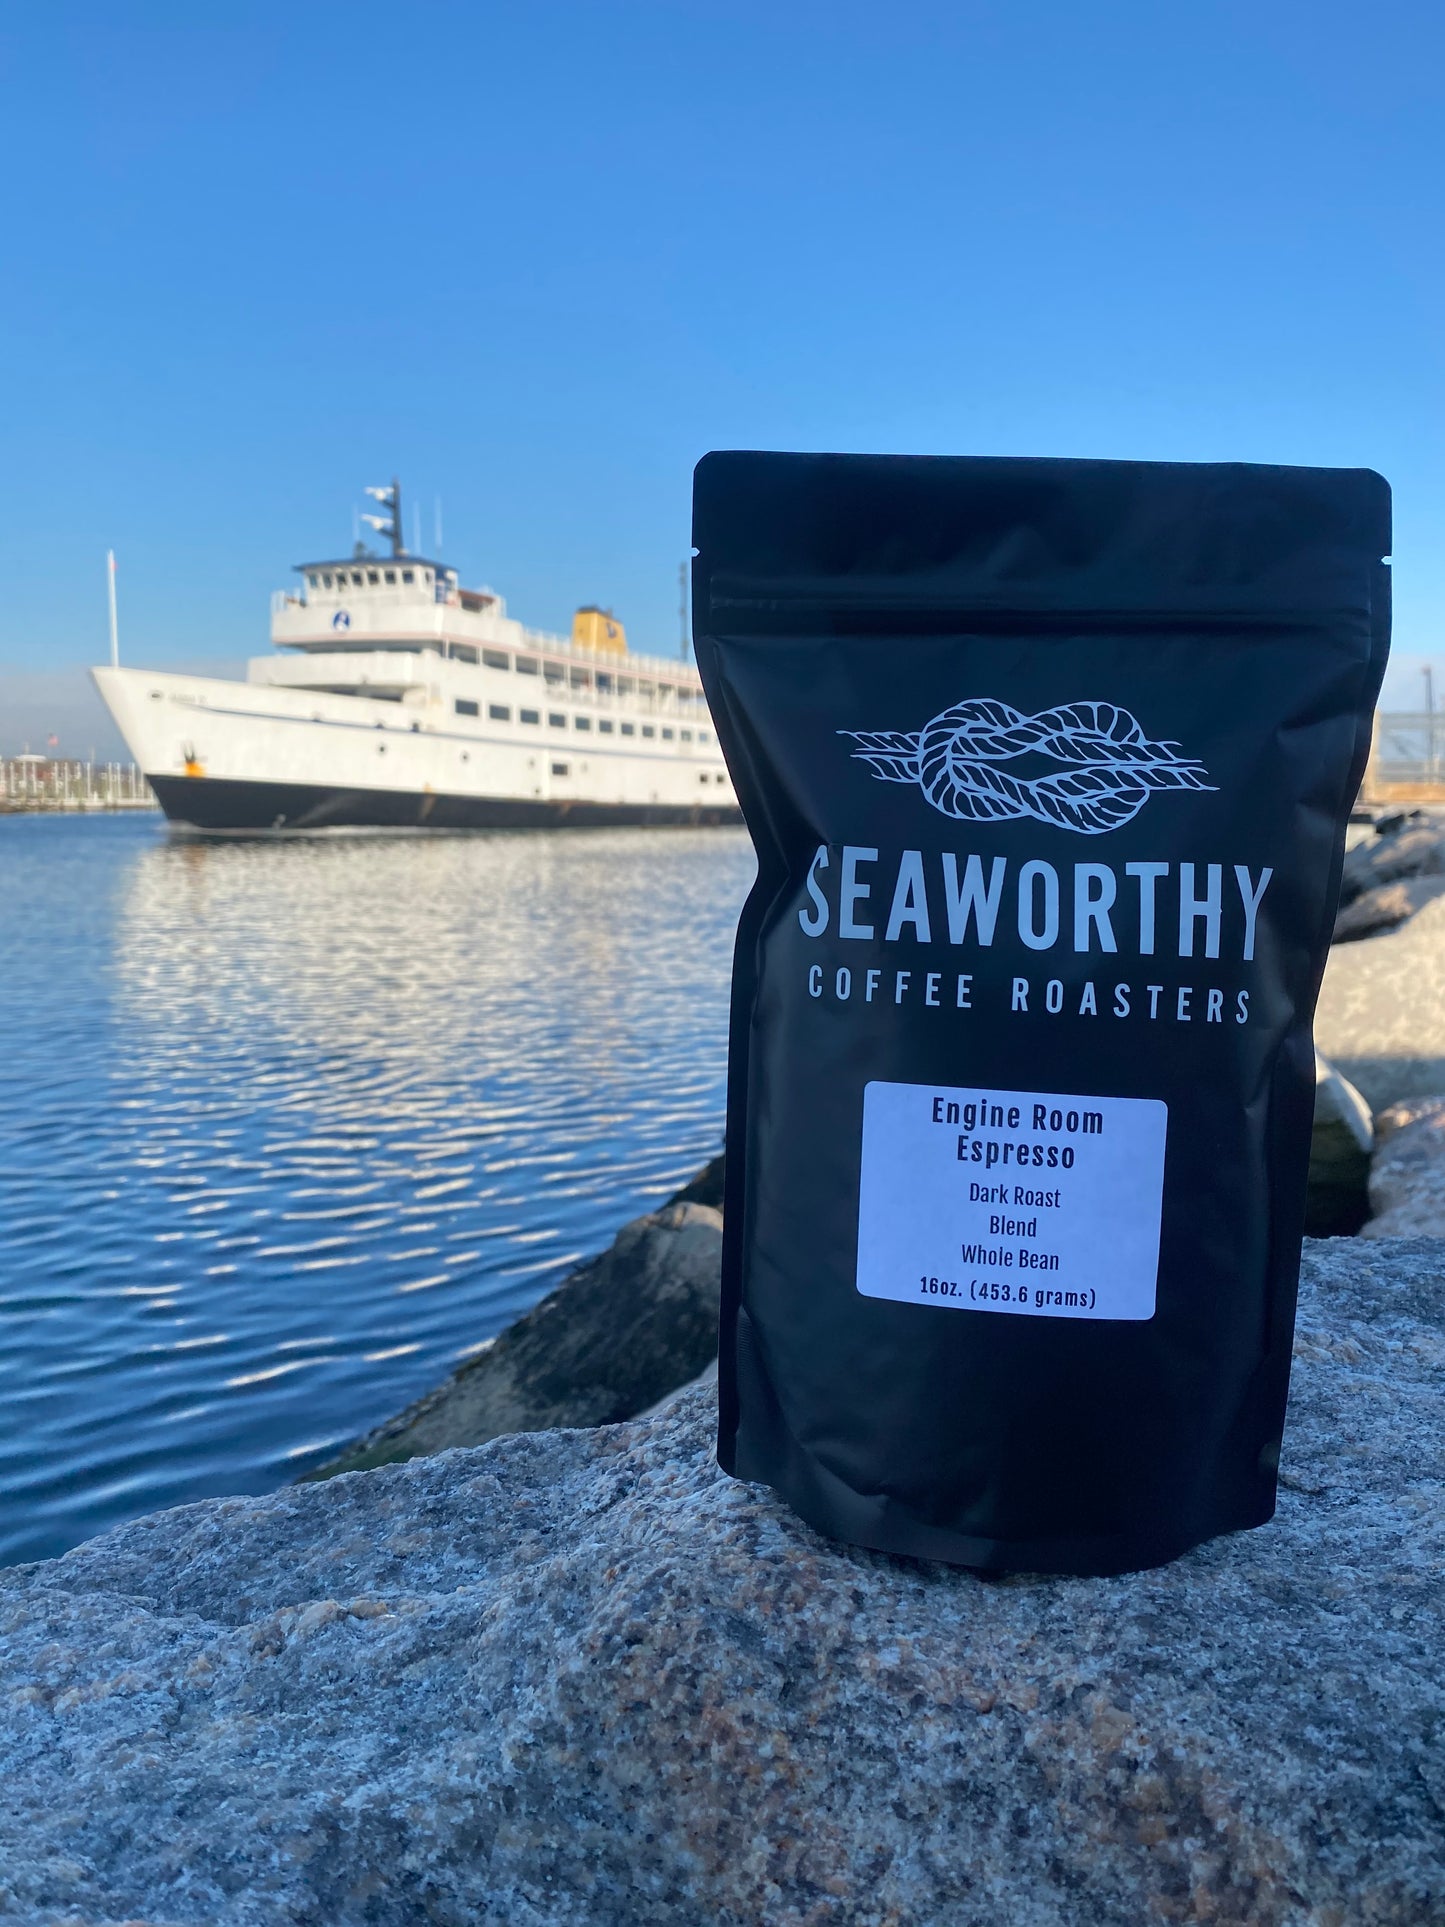 This blend features a silky smooth mouthfeel and sweet and savory cocoa notes.  We've added robusta variety beans for extra kick and deeper flavor, so you can consider this smooth yet strong espresso blend the "engine room" of your day.  Enjoy as a delicious cup of dark roast coffee or pulled as an espresso shot!